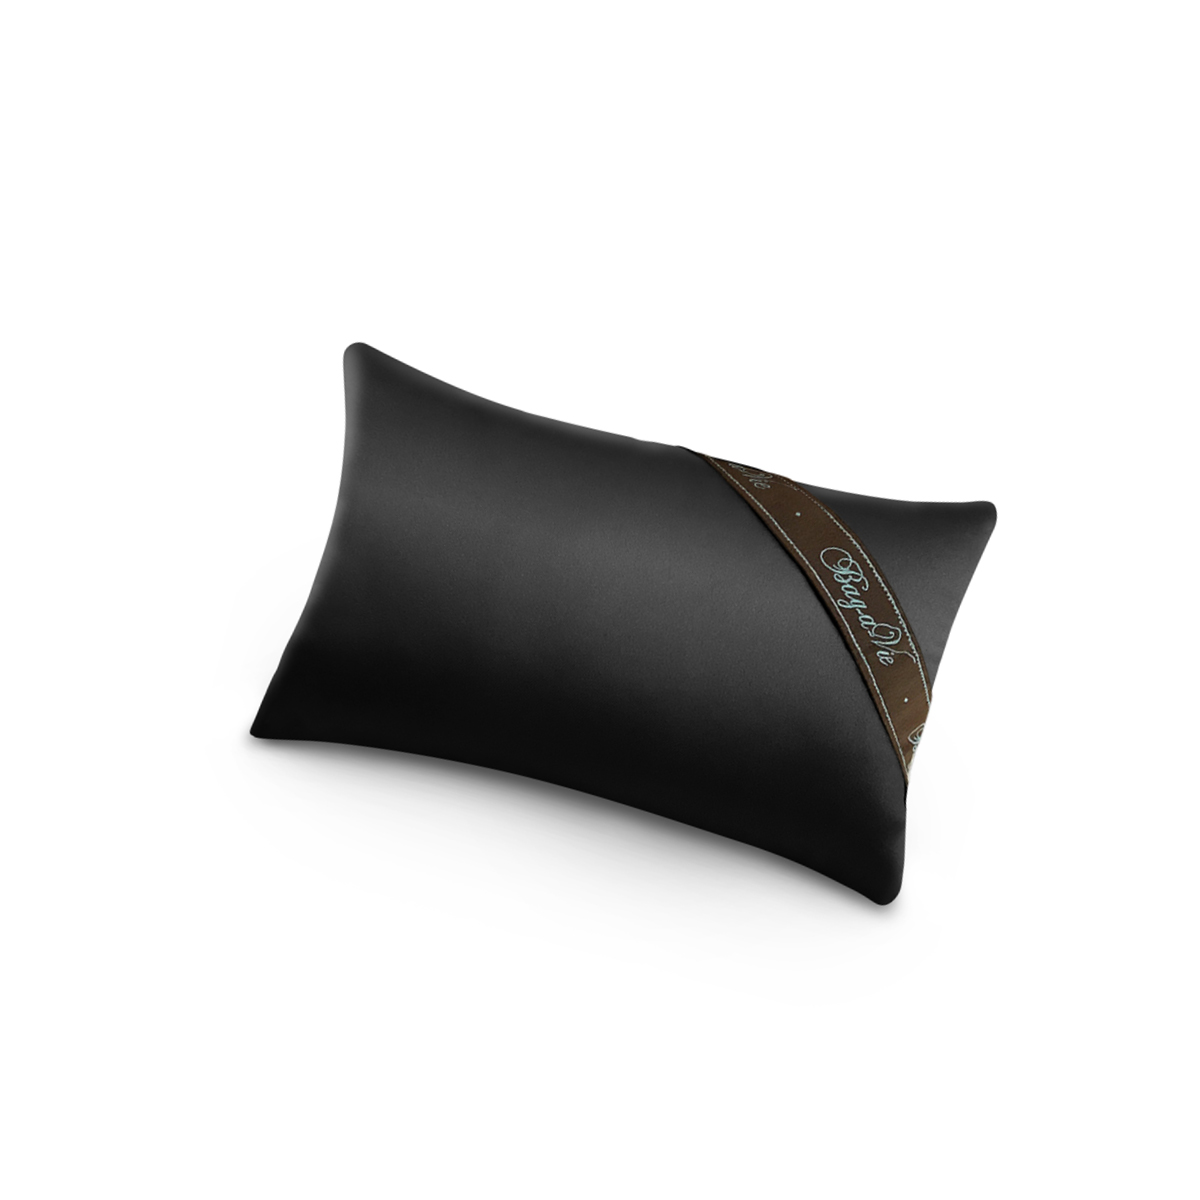 Satin Pillow Luxury Bag Shaper in Medium-Size For Designer Bags (Champagne)  - More colors available